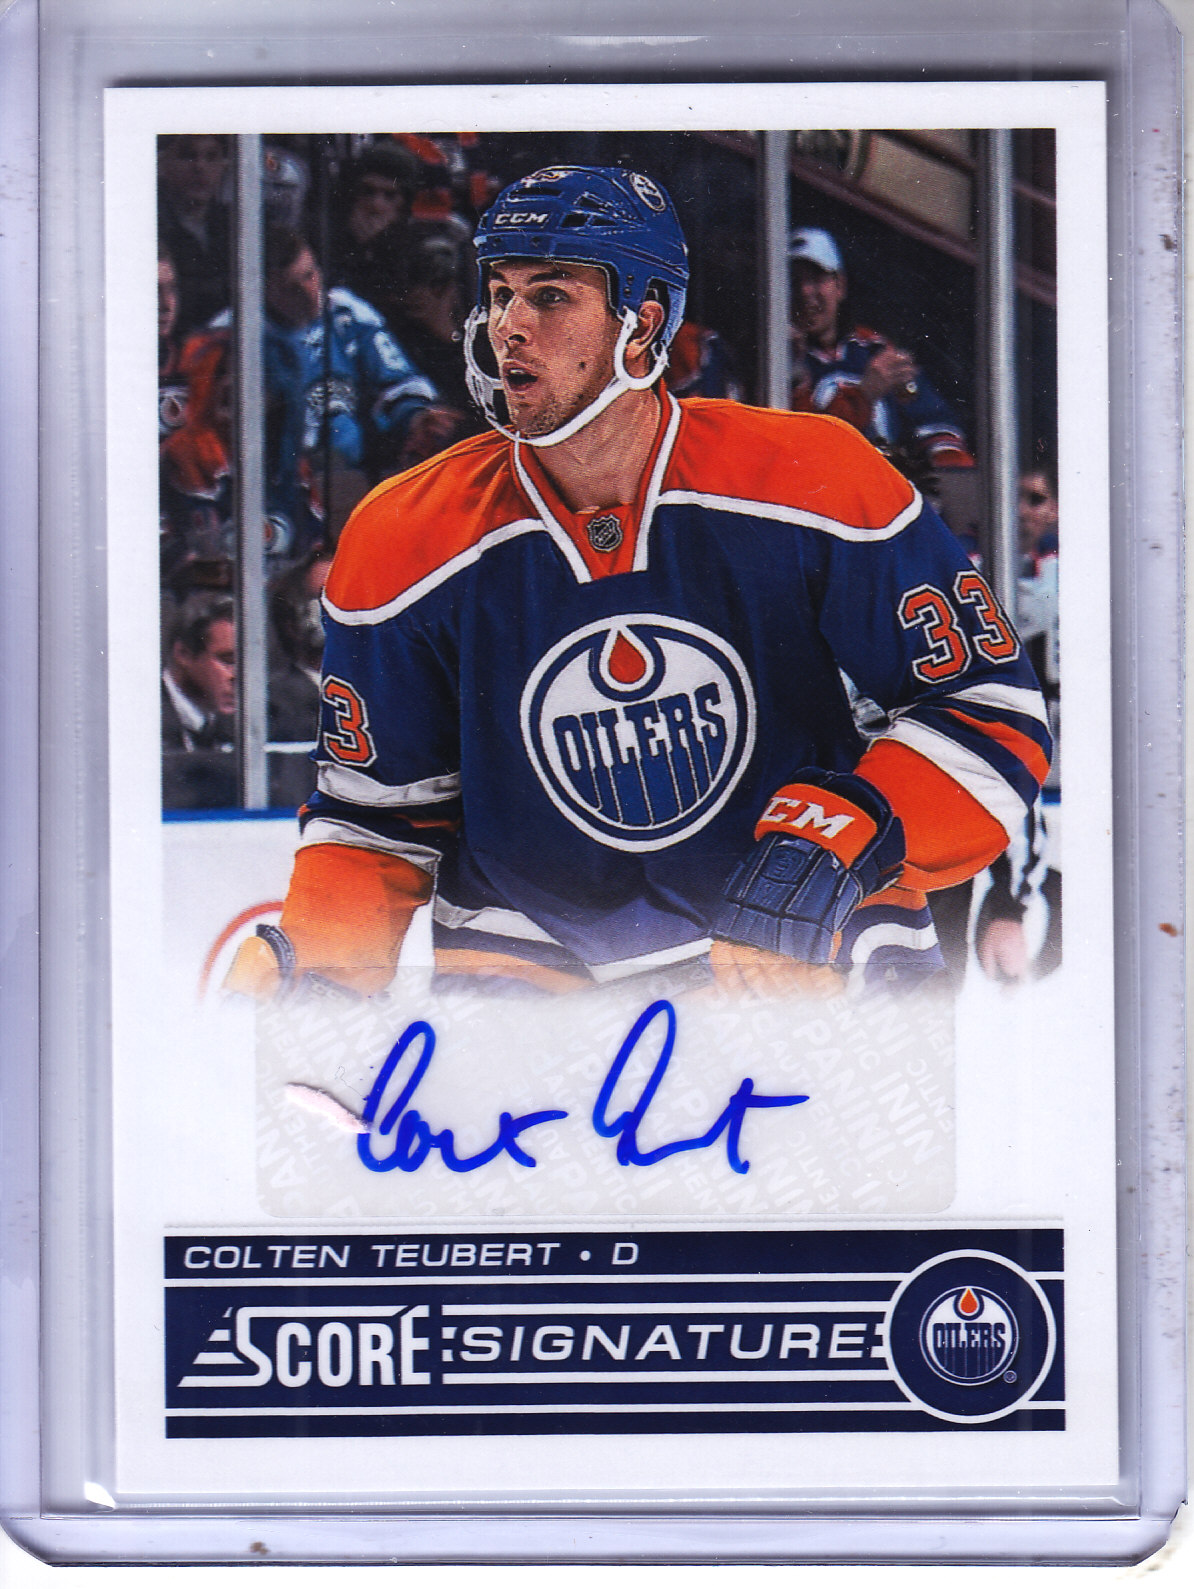 2013-14 Score Signatures #SSCT Colten Teubert/(inserted in 2013-14 Rookie Anthology)